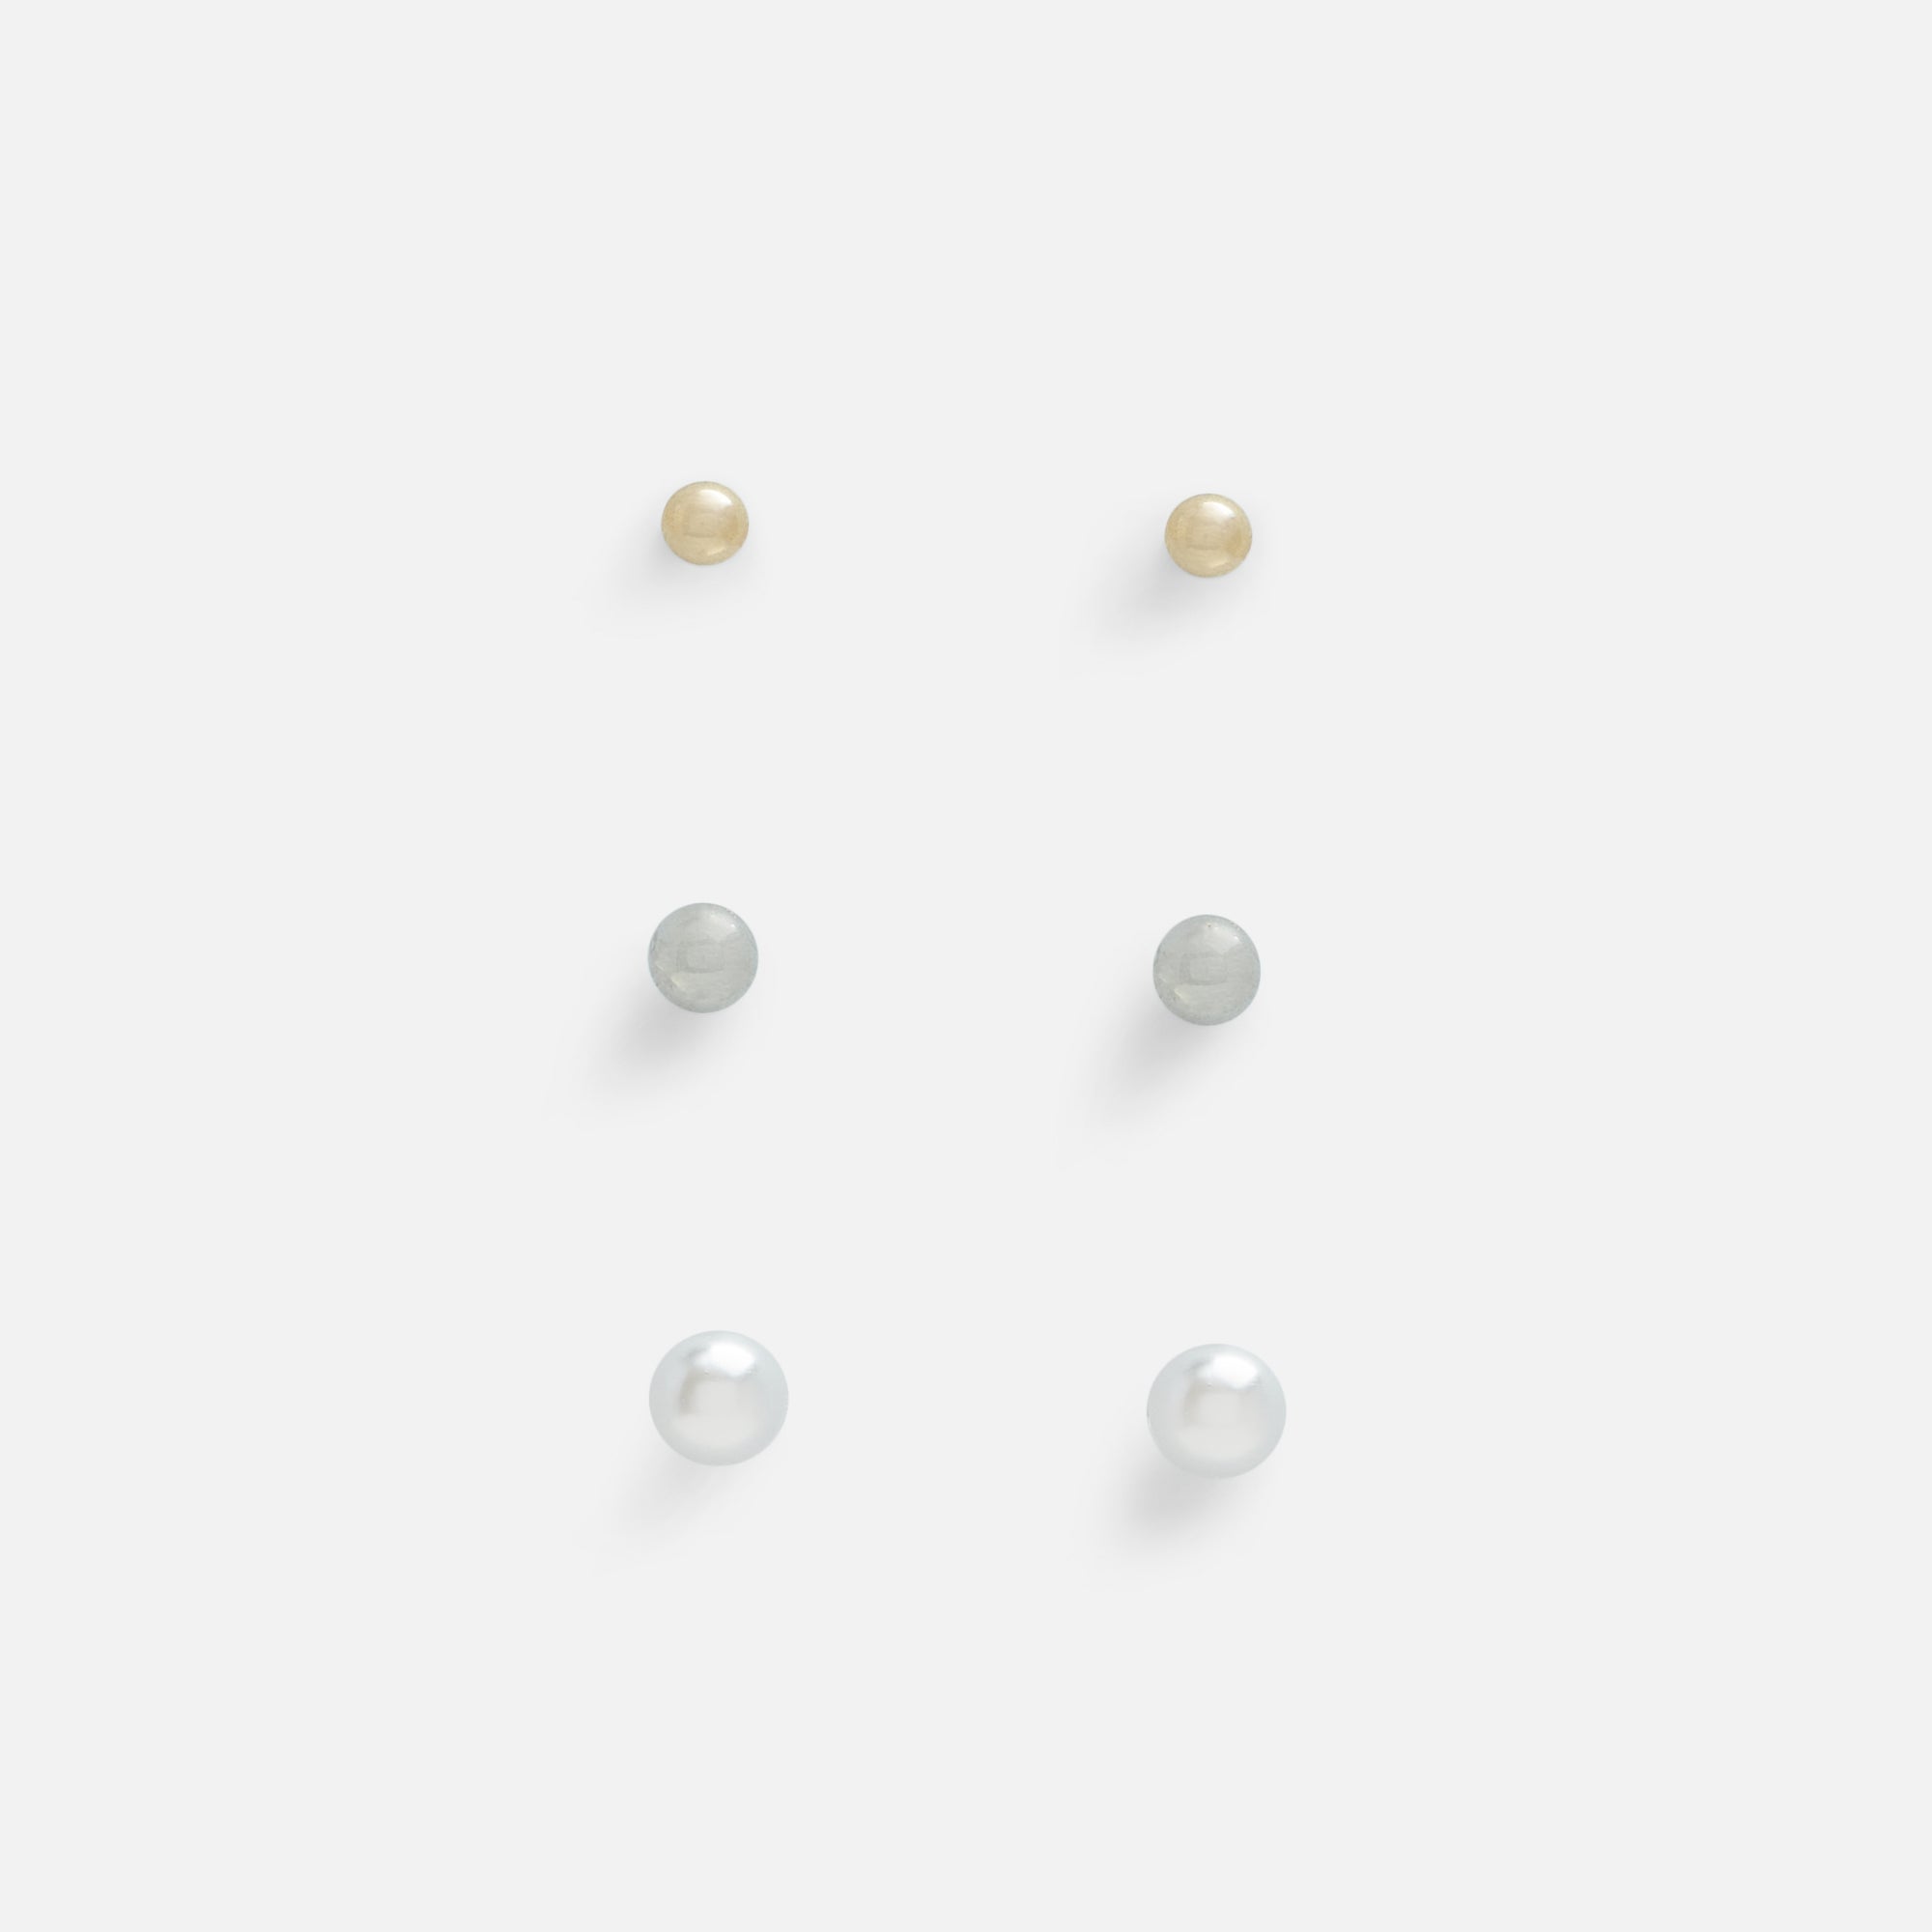 Golden, silver and pearl fixed earrings set